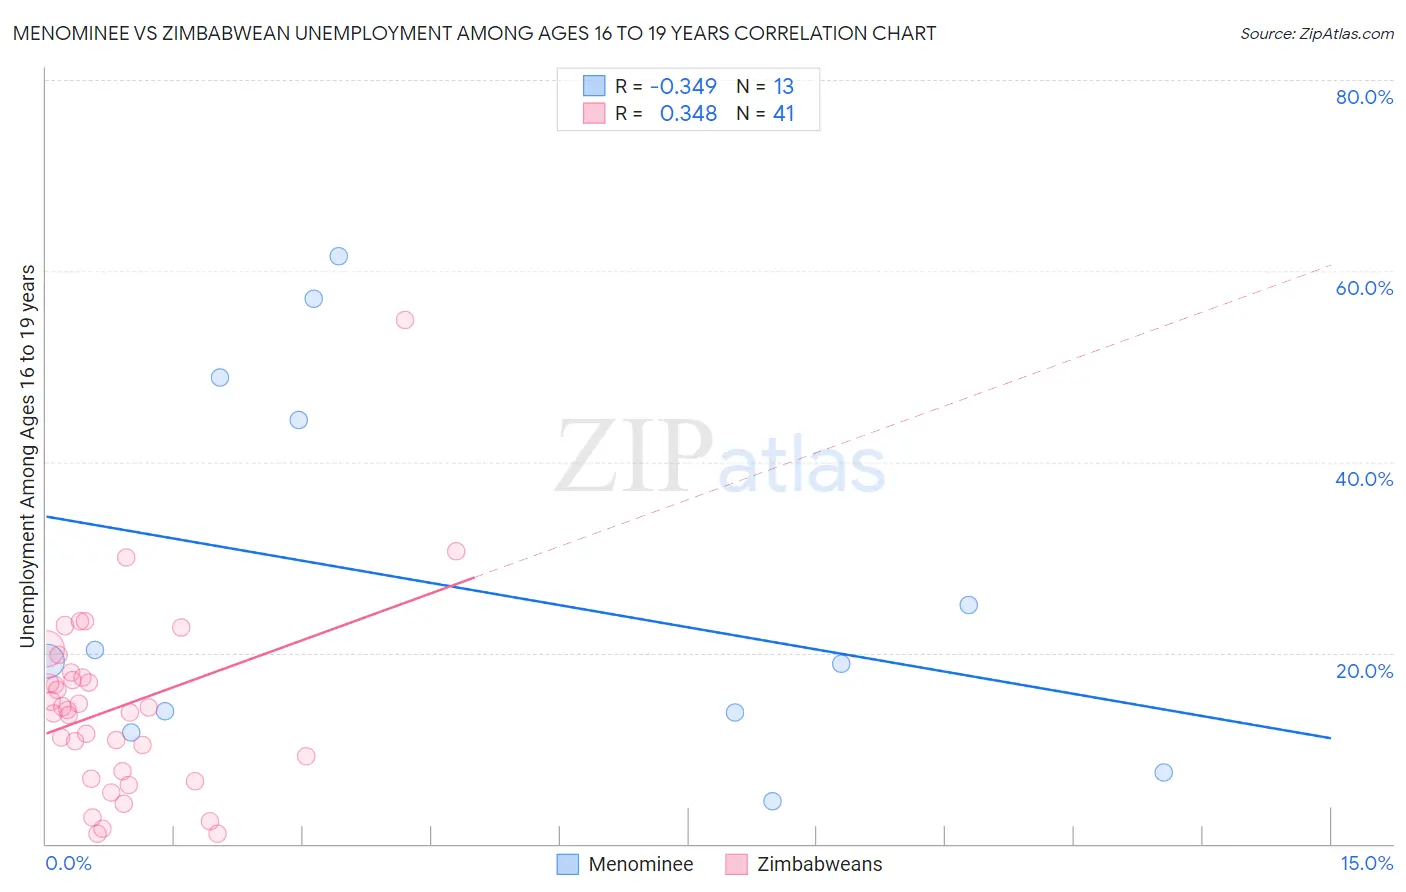 Menominee vs Zimbabwean Unemployment Among Ages 16 to 19 years